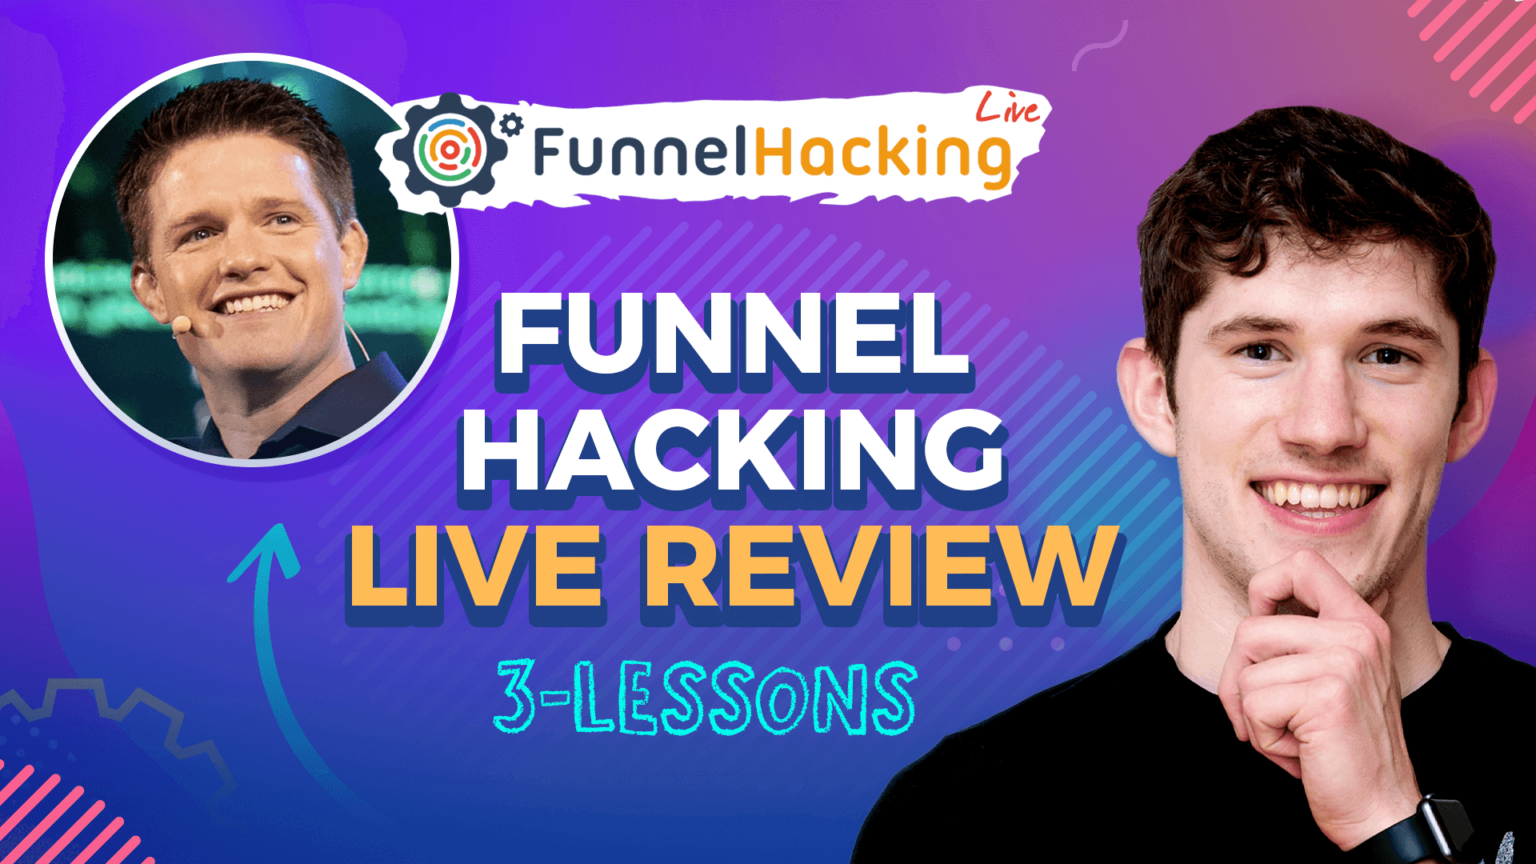 Russell Brunson and Funnel Hacking Liv